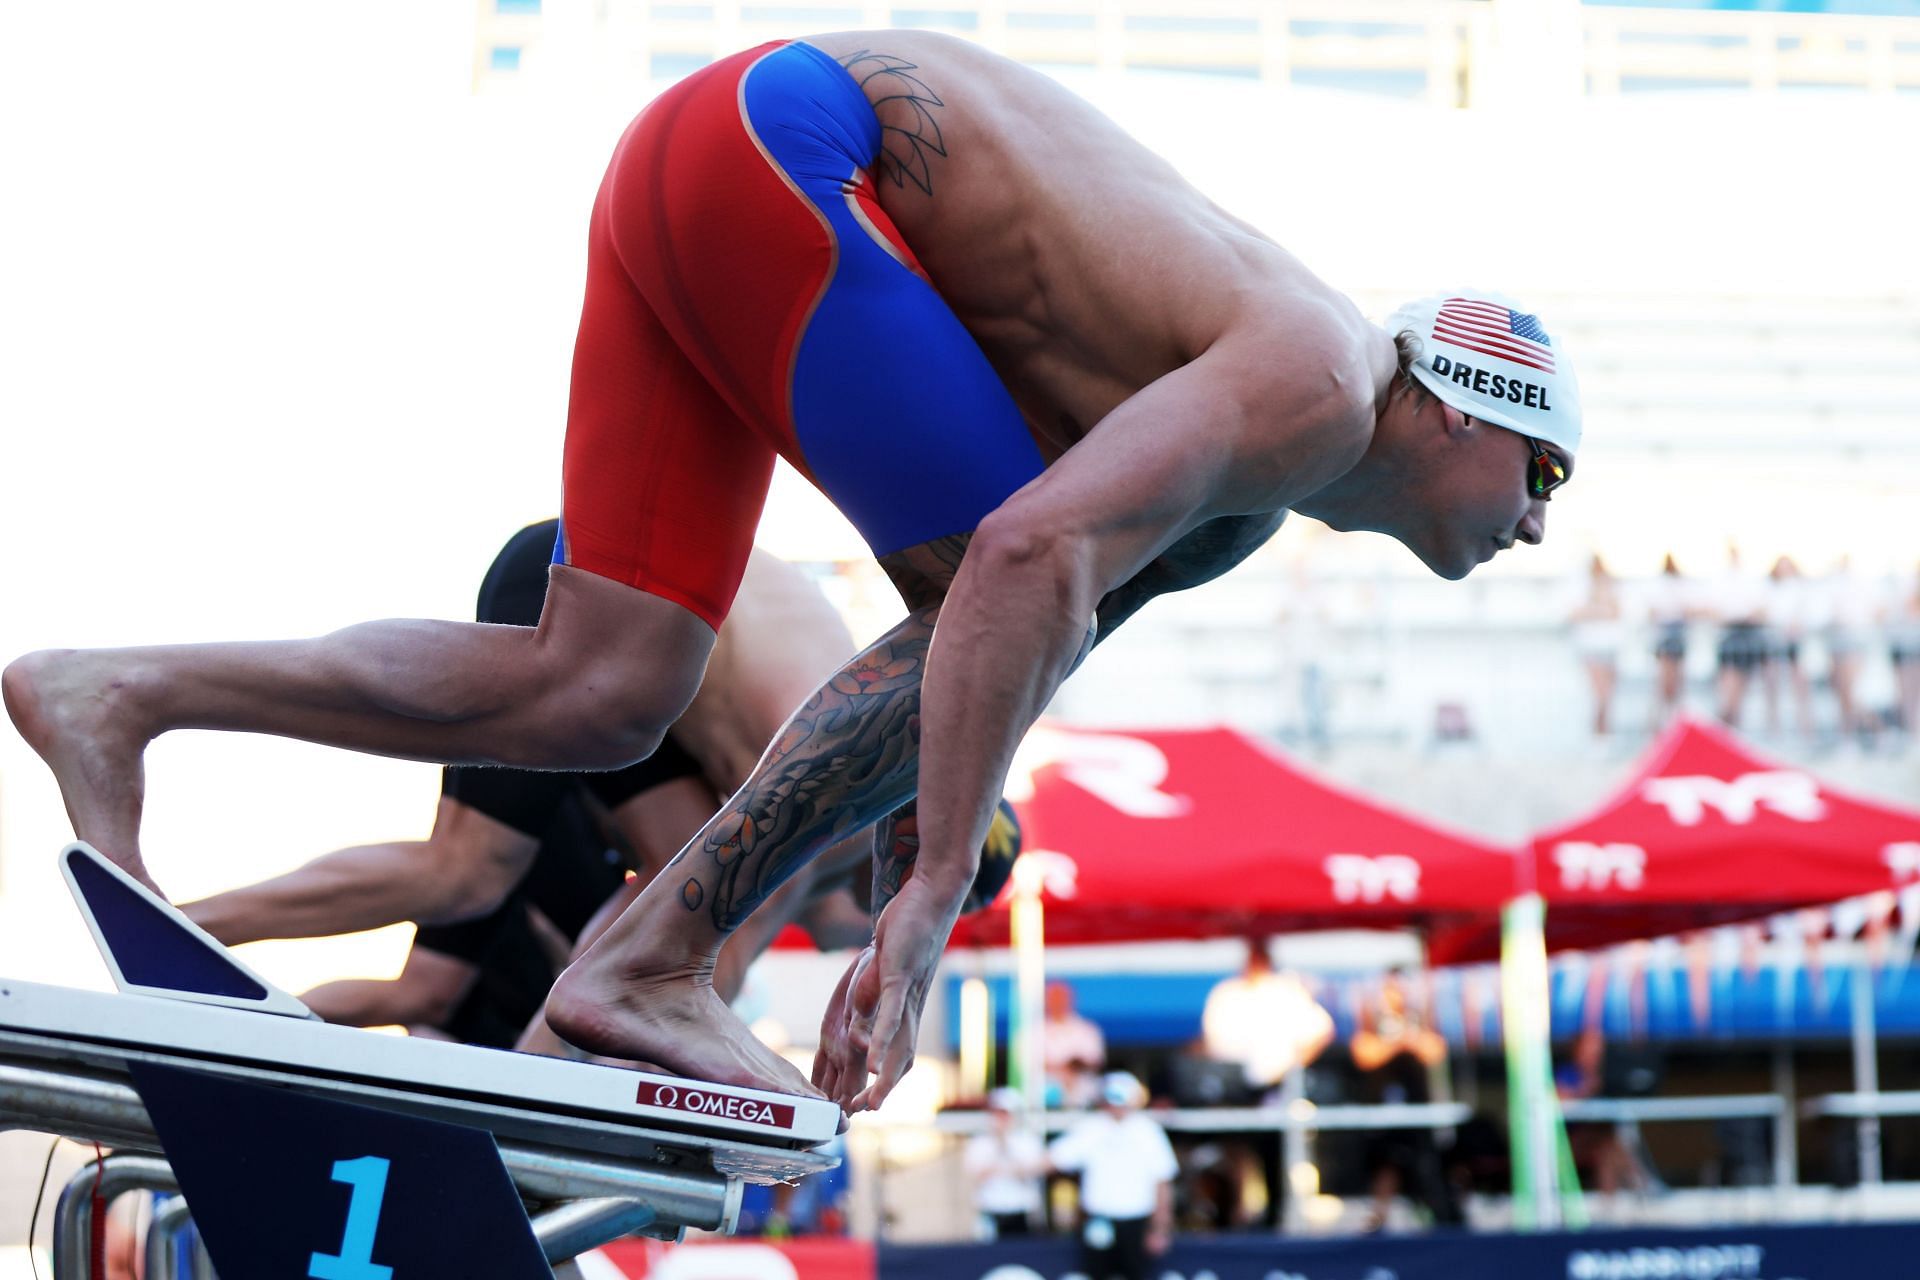 How tall is Caeleb Dressel compared to other swimmers?